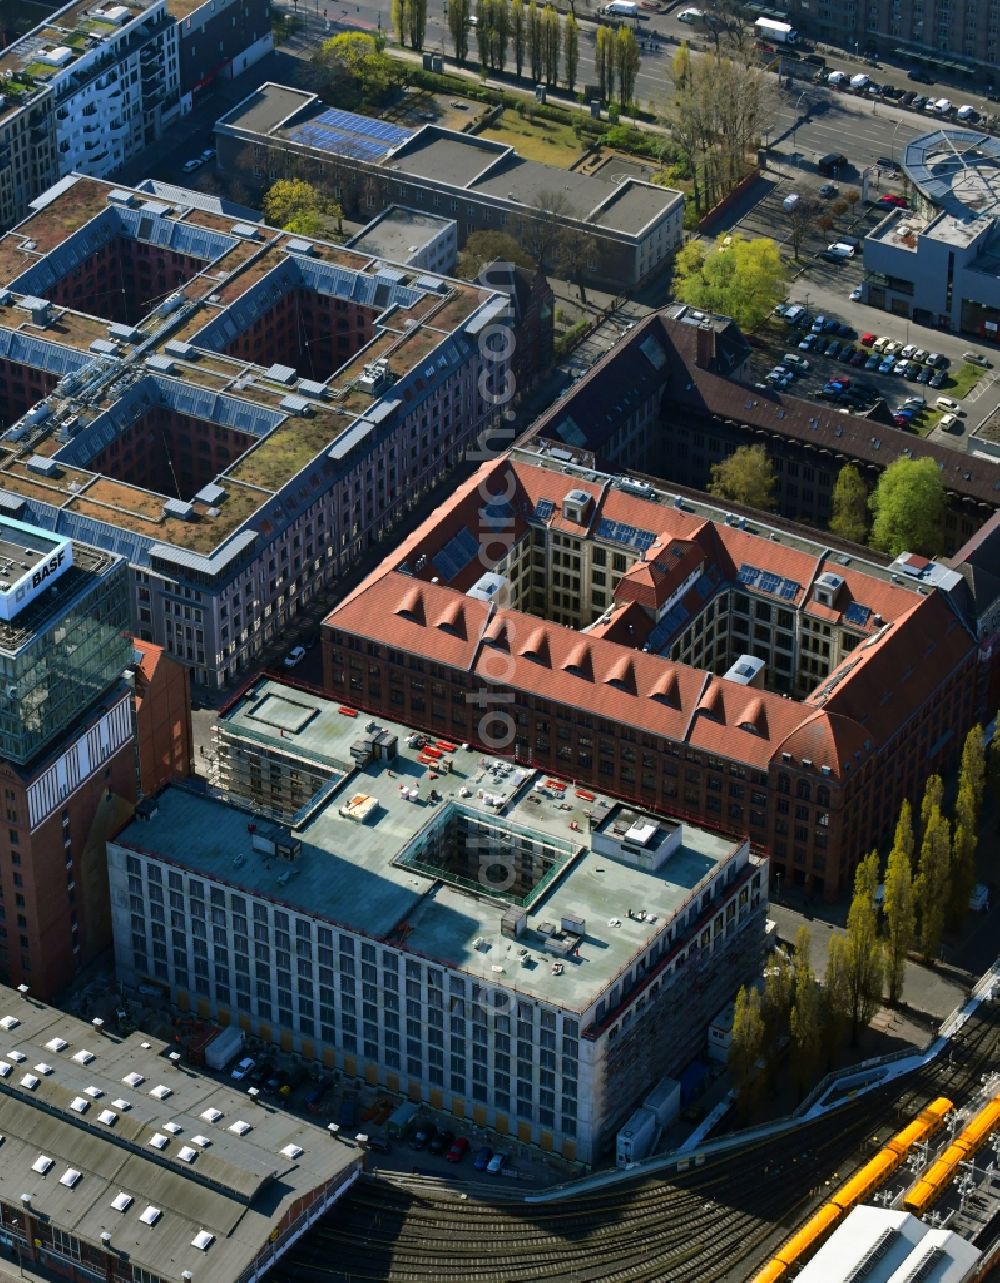 Aerial photograph Berlin - Construction site on building of the monument protected former Osram respectively Narva company premises Oberbaum City in the district Friedrichshain in Berlin. Here, among many other companies, BASF Services Europe, the German Post Customer Service Center GmbH and Heineken Germany GmbH are located. It is owned by HVB Immobilien AG, which is part of the UniCredit Group